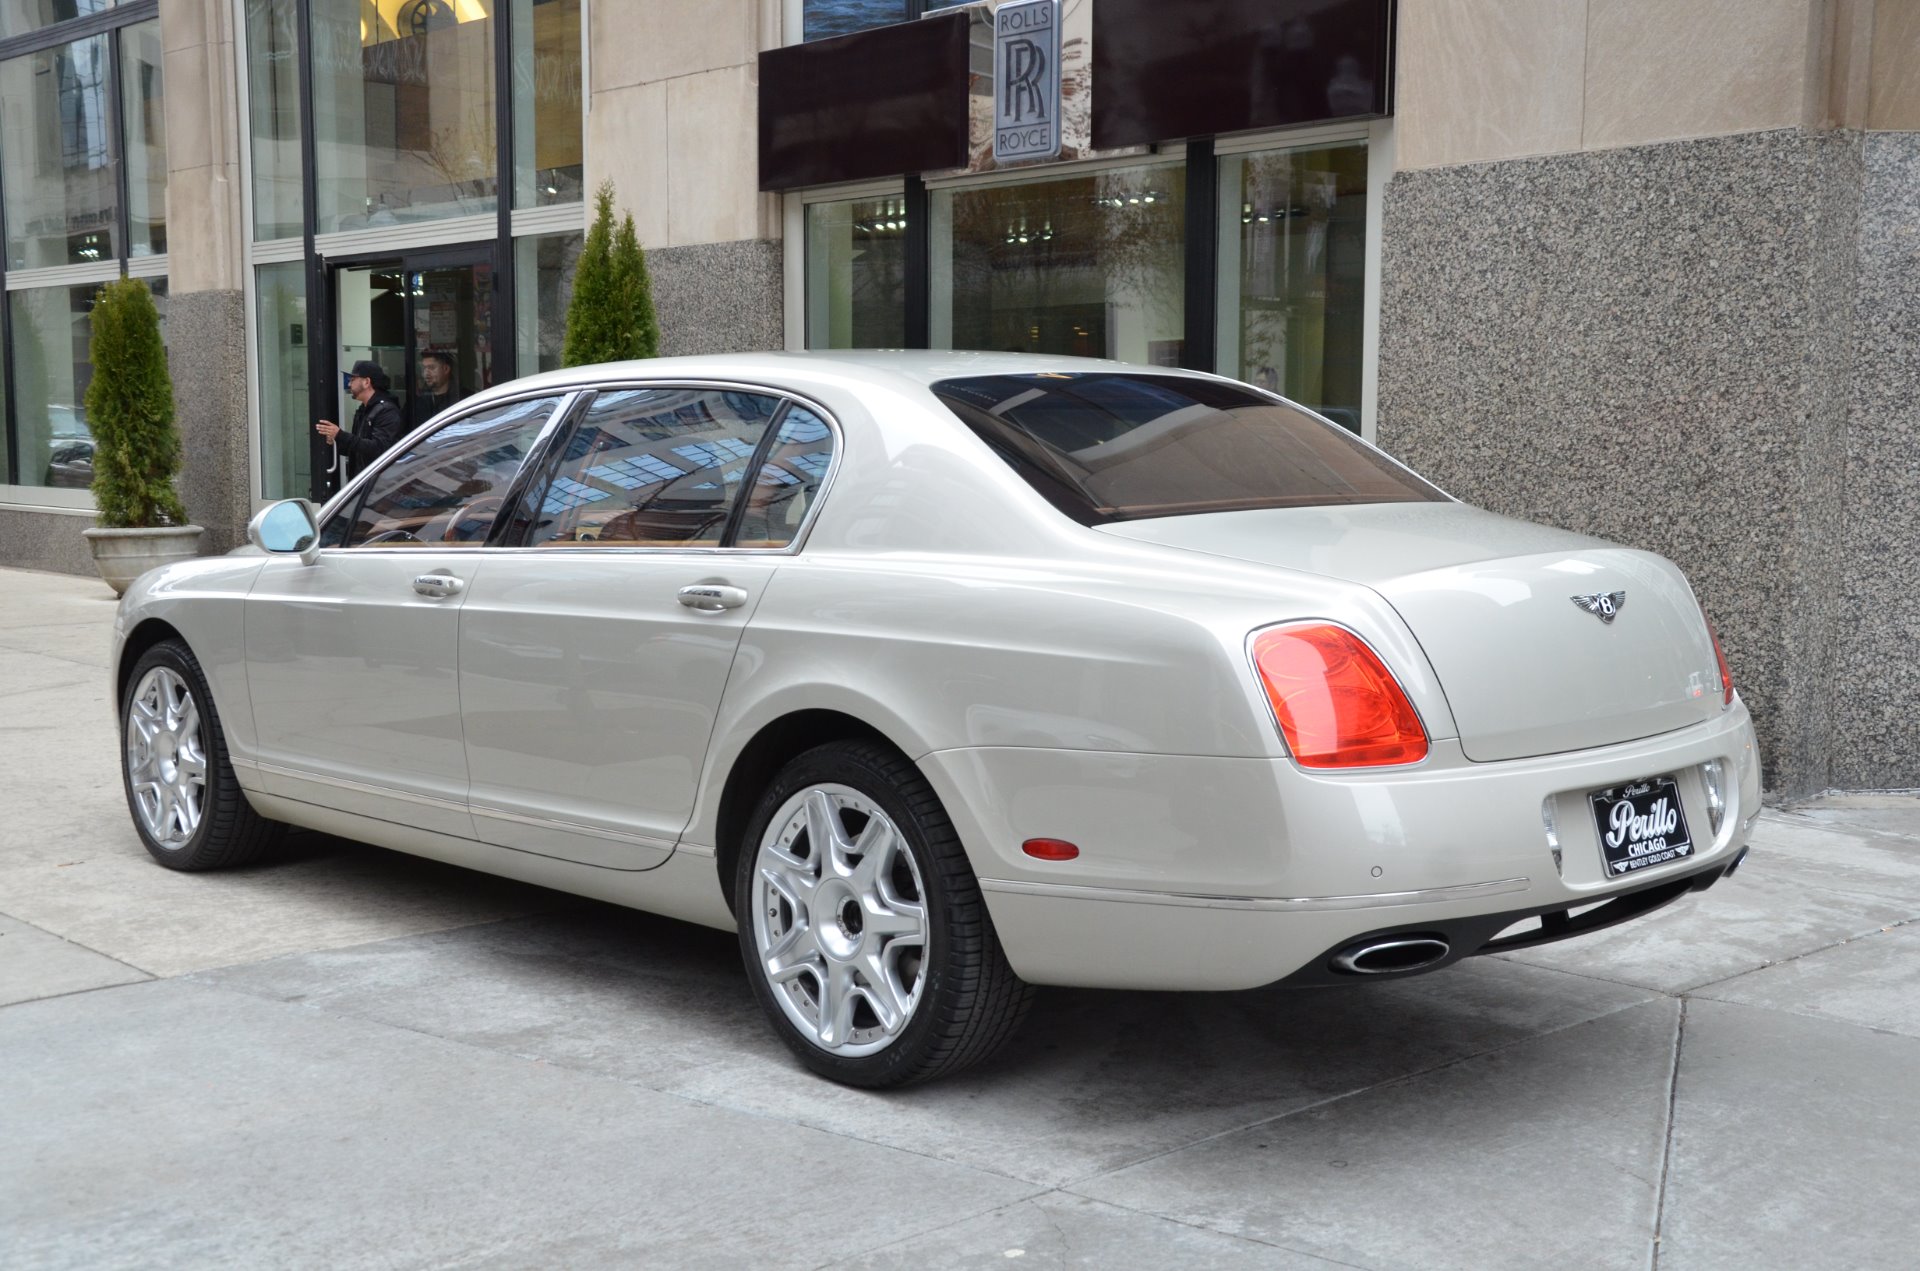 2010 Bentley Continental Flying Spur Stock # R259B for sale near Chicago,  IL | IL Bentley Dealer